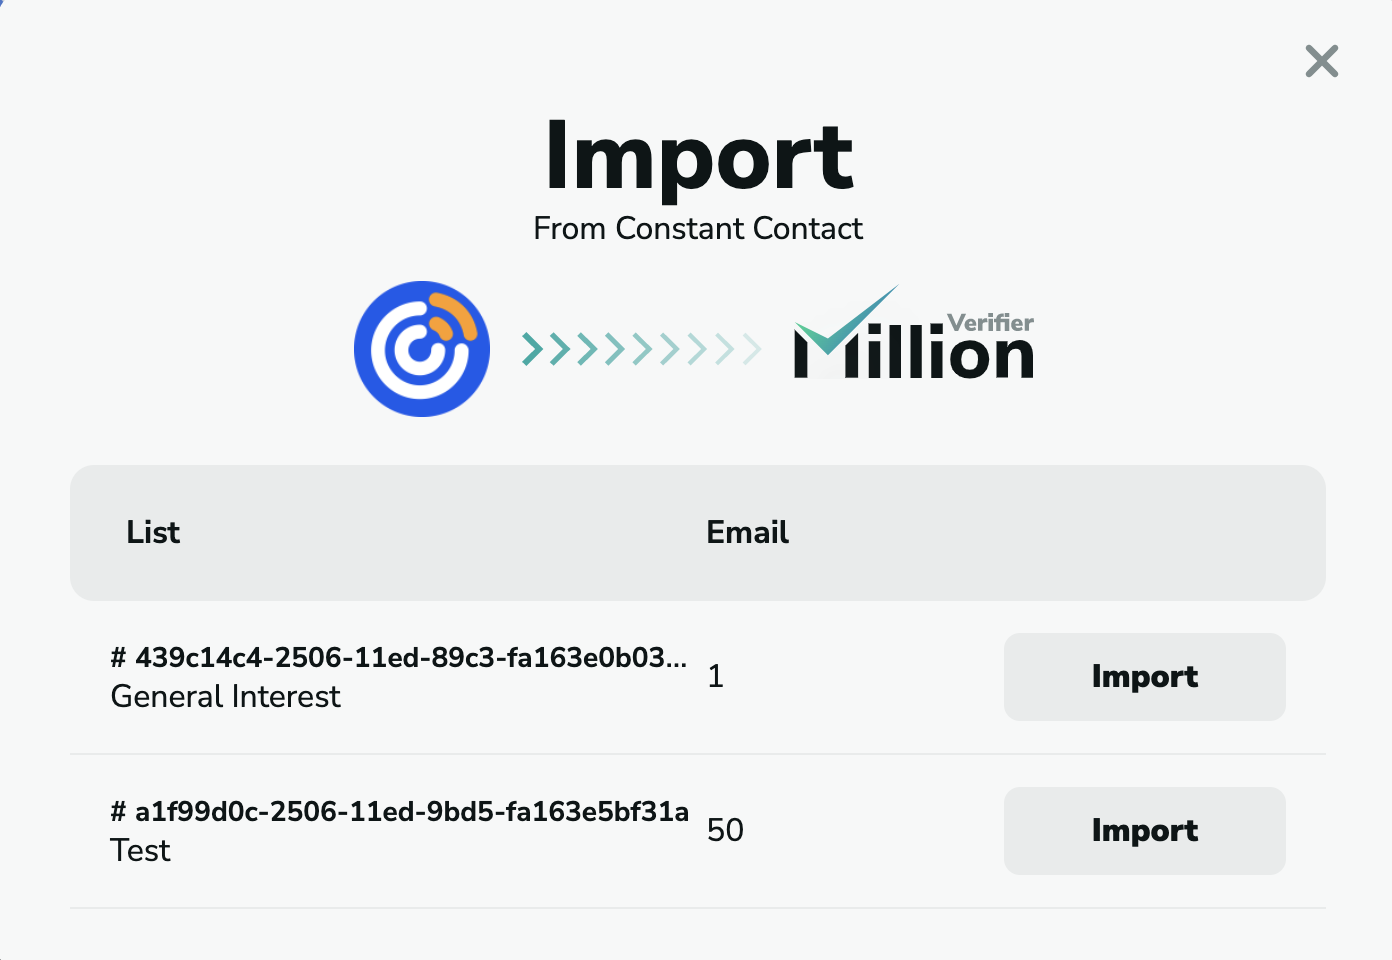 Constant Contact import emails in MillionVerifier